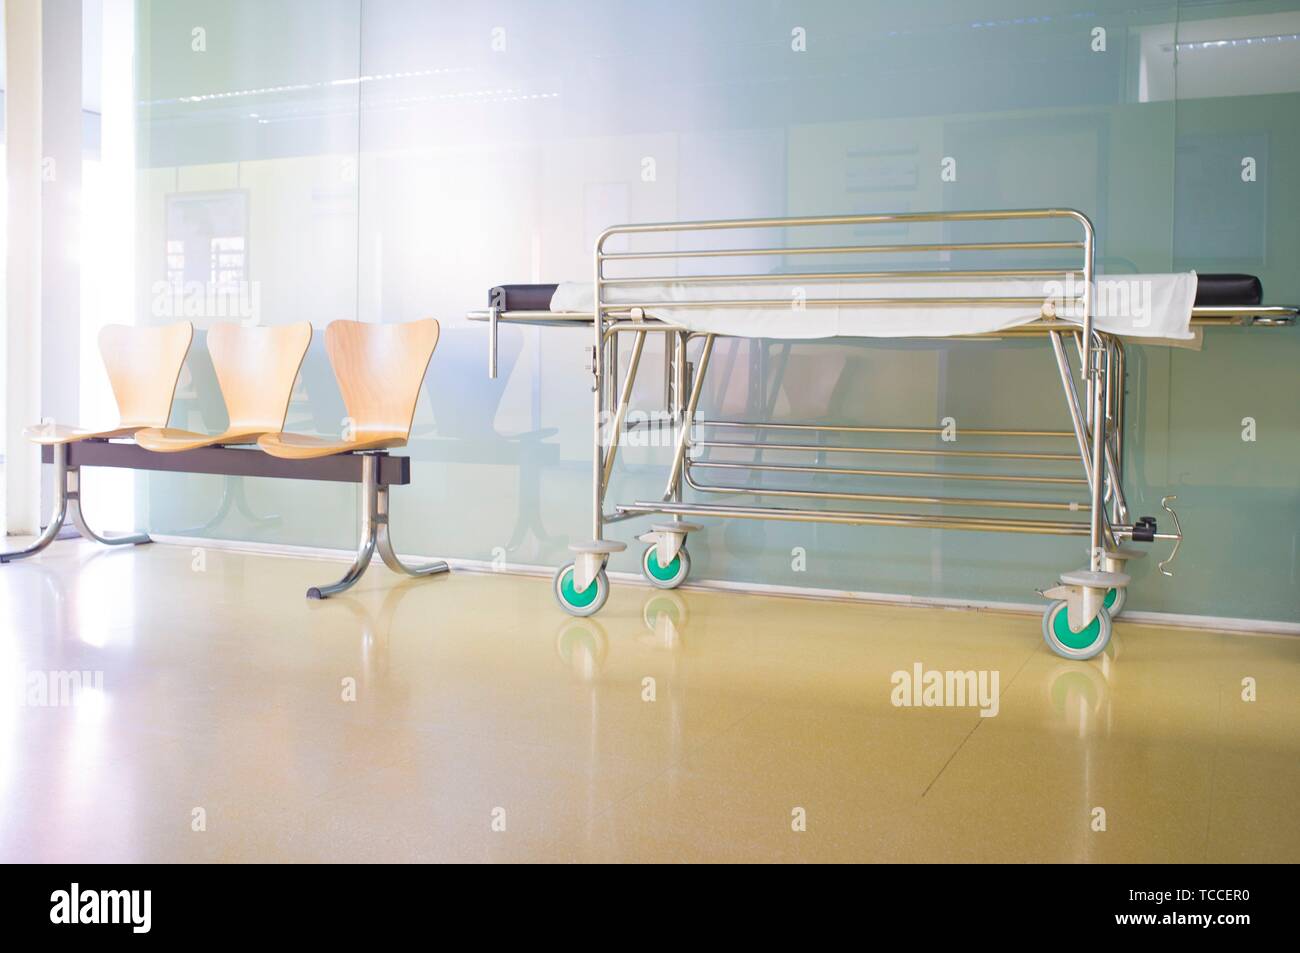 Interior of healthcare center hallway. Modern and gleaming environment with stretcher and wooden waiting chairs. Stock Photo